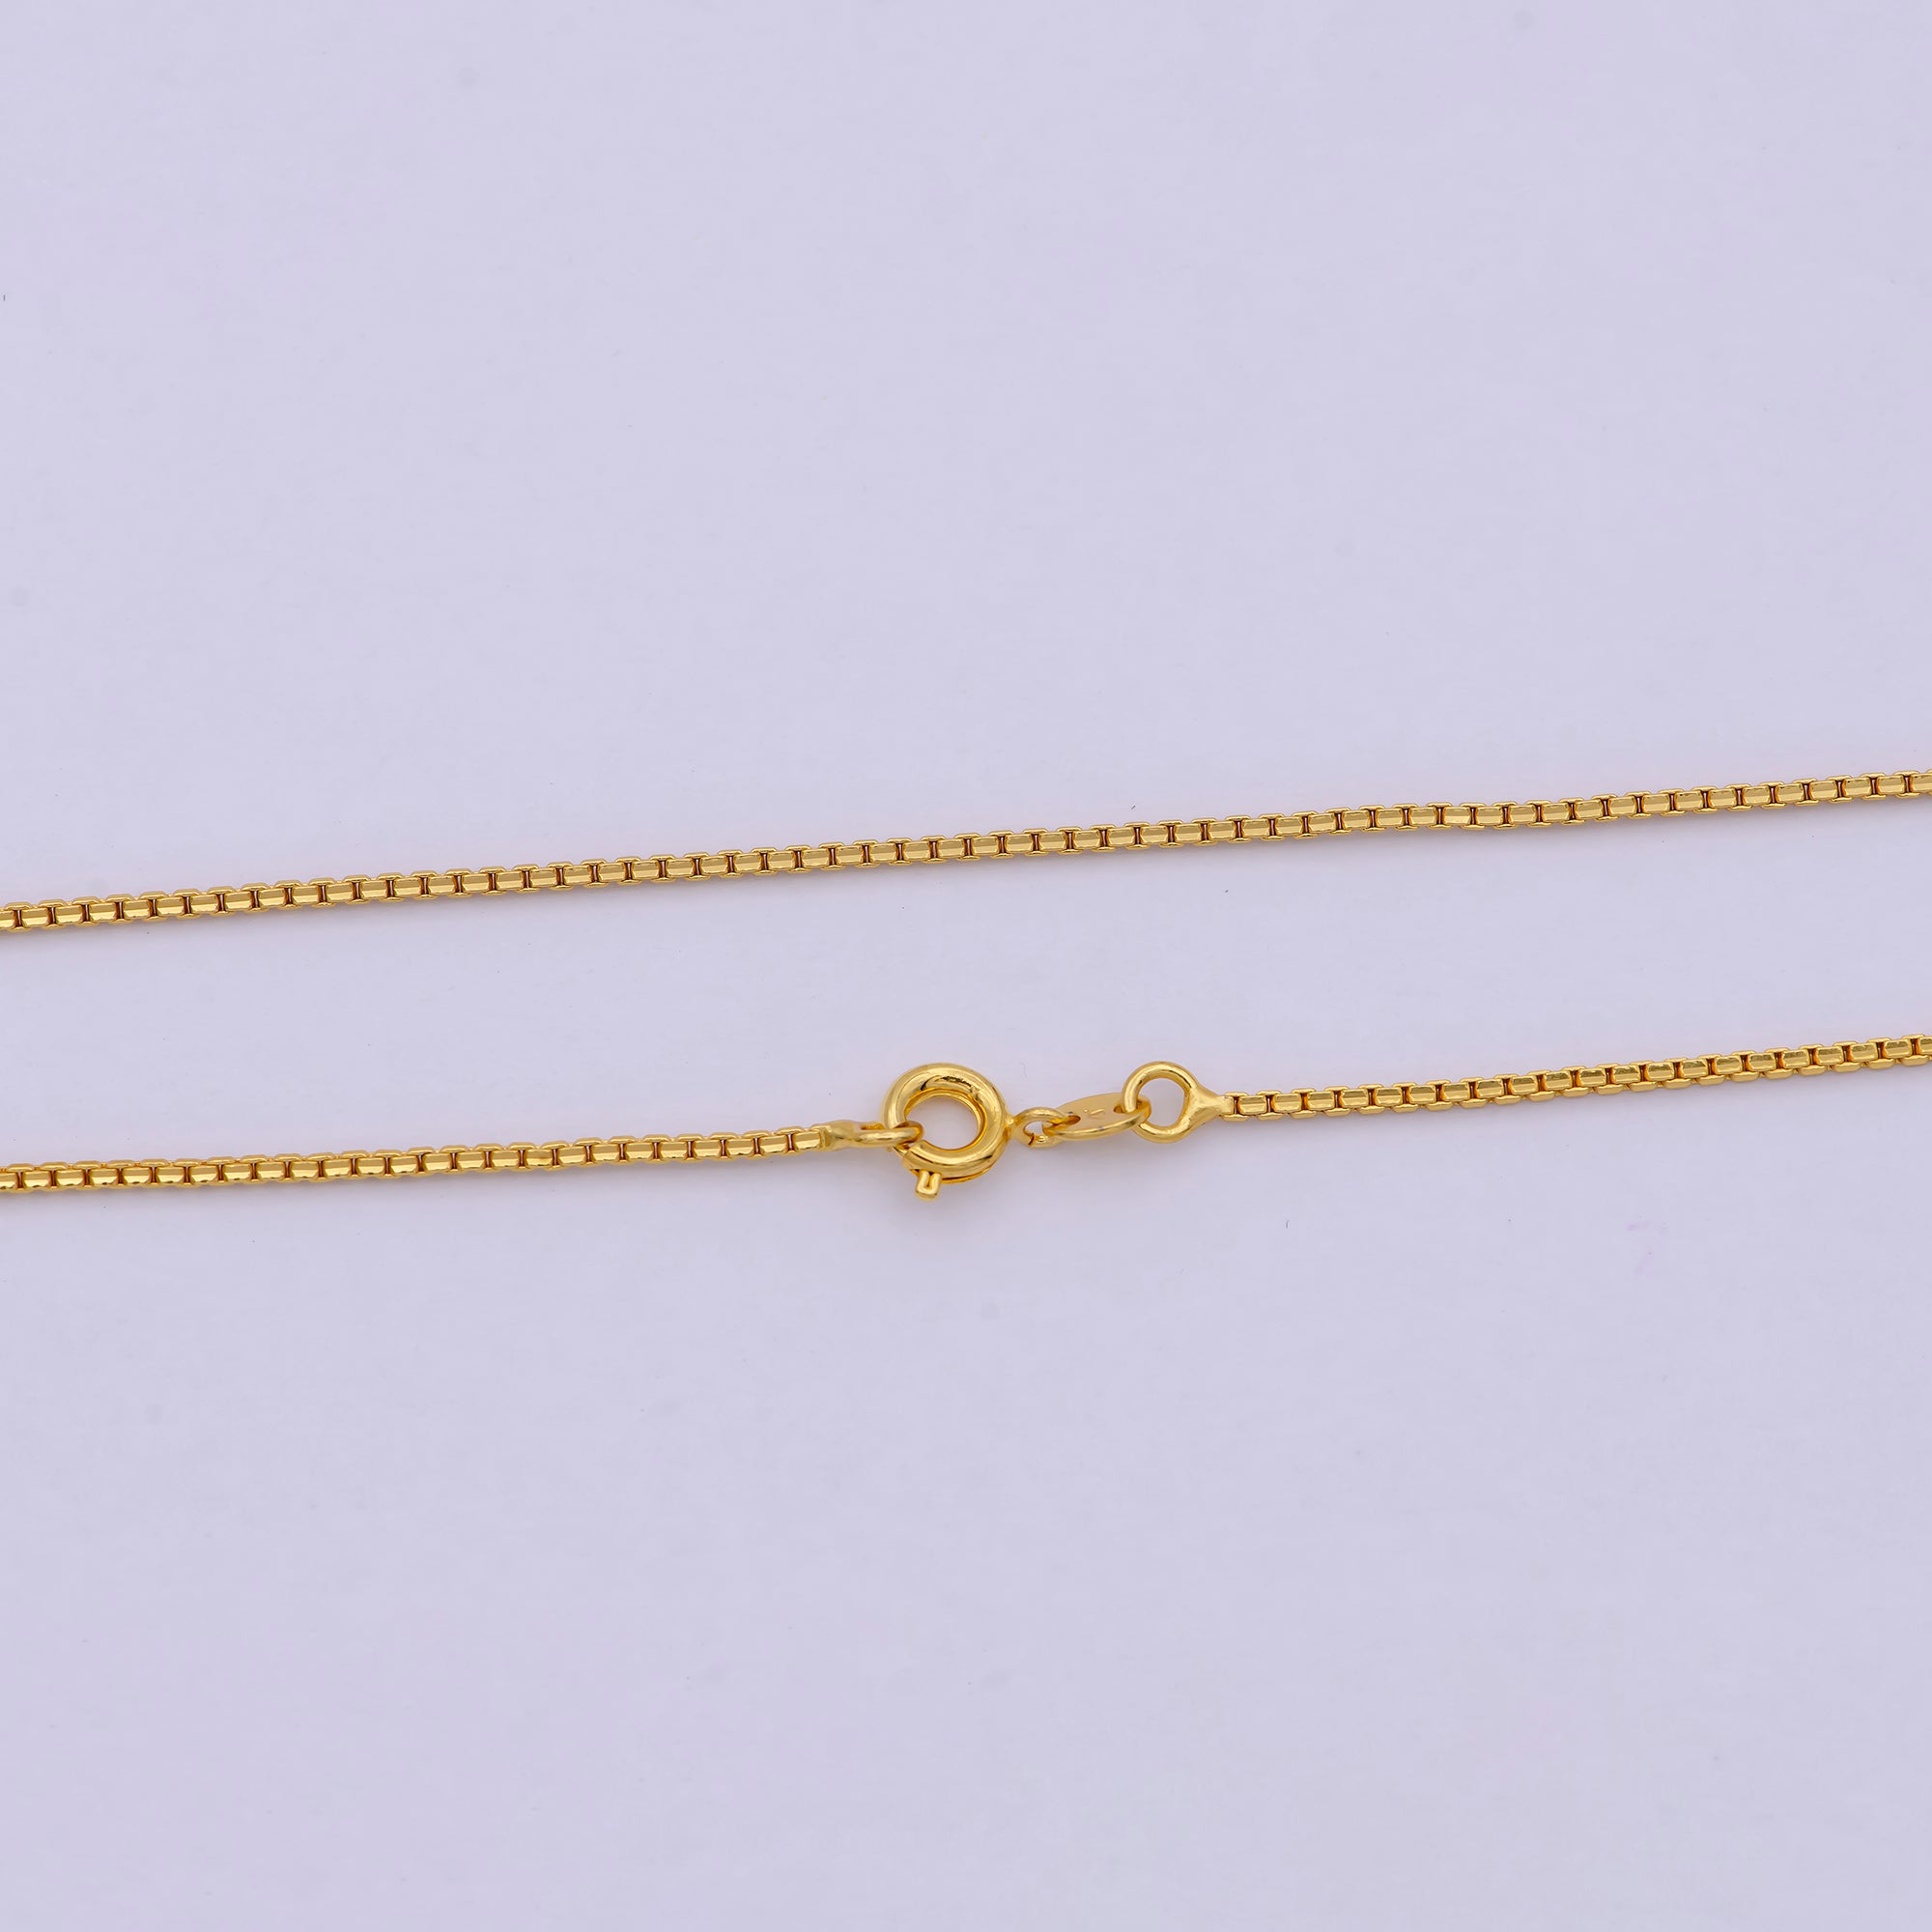 24k Gold Filled Box Chain Necklace, 18 Inch, 1mm Gold Chain, Box Link Chain For Women Men - DLUXCA